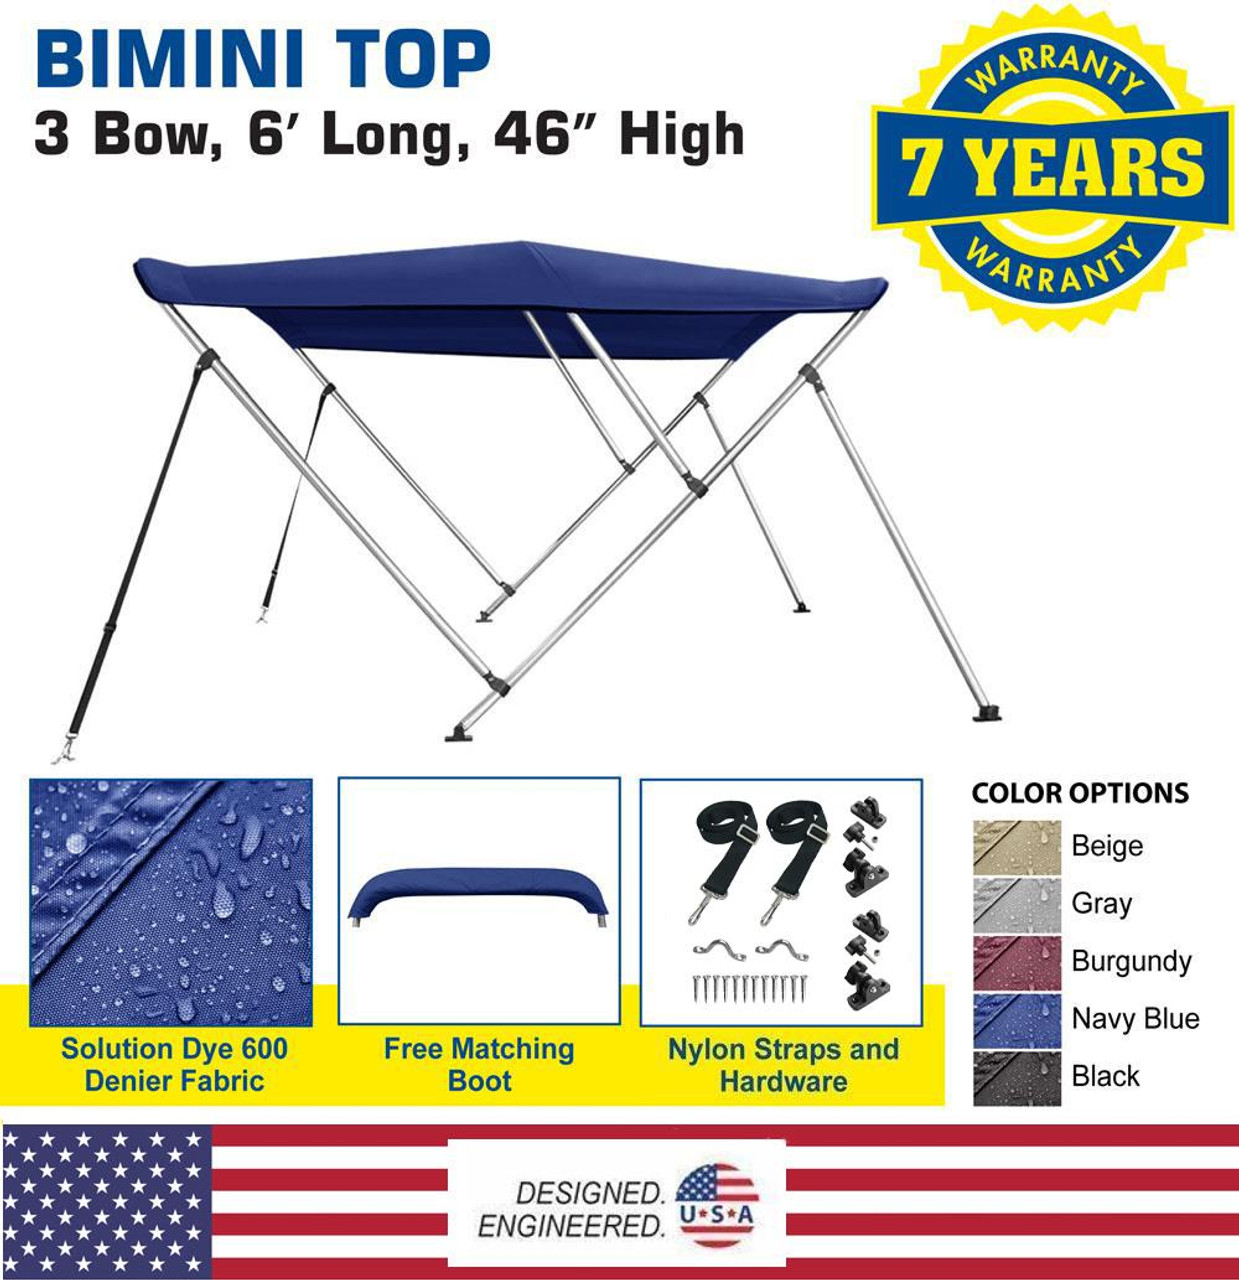 Bimini Top Boat Cover 46 High 3 Bow 79-84 Wide 6' L NAVY BLUE